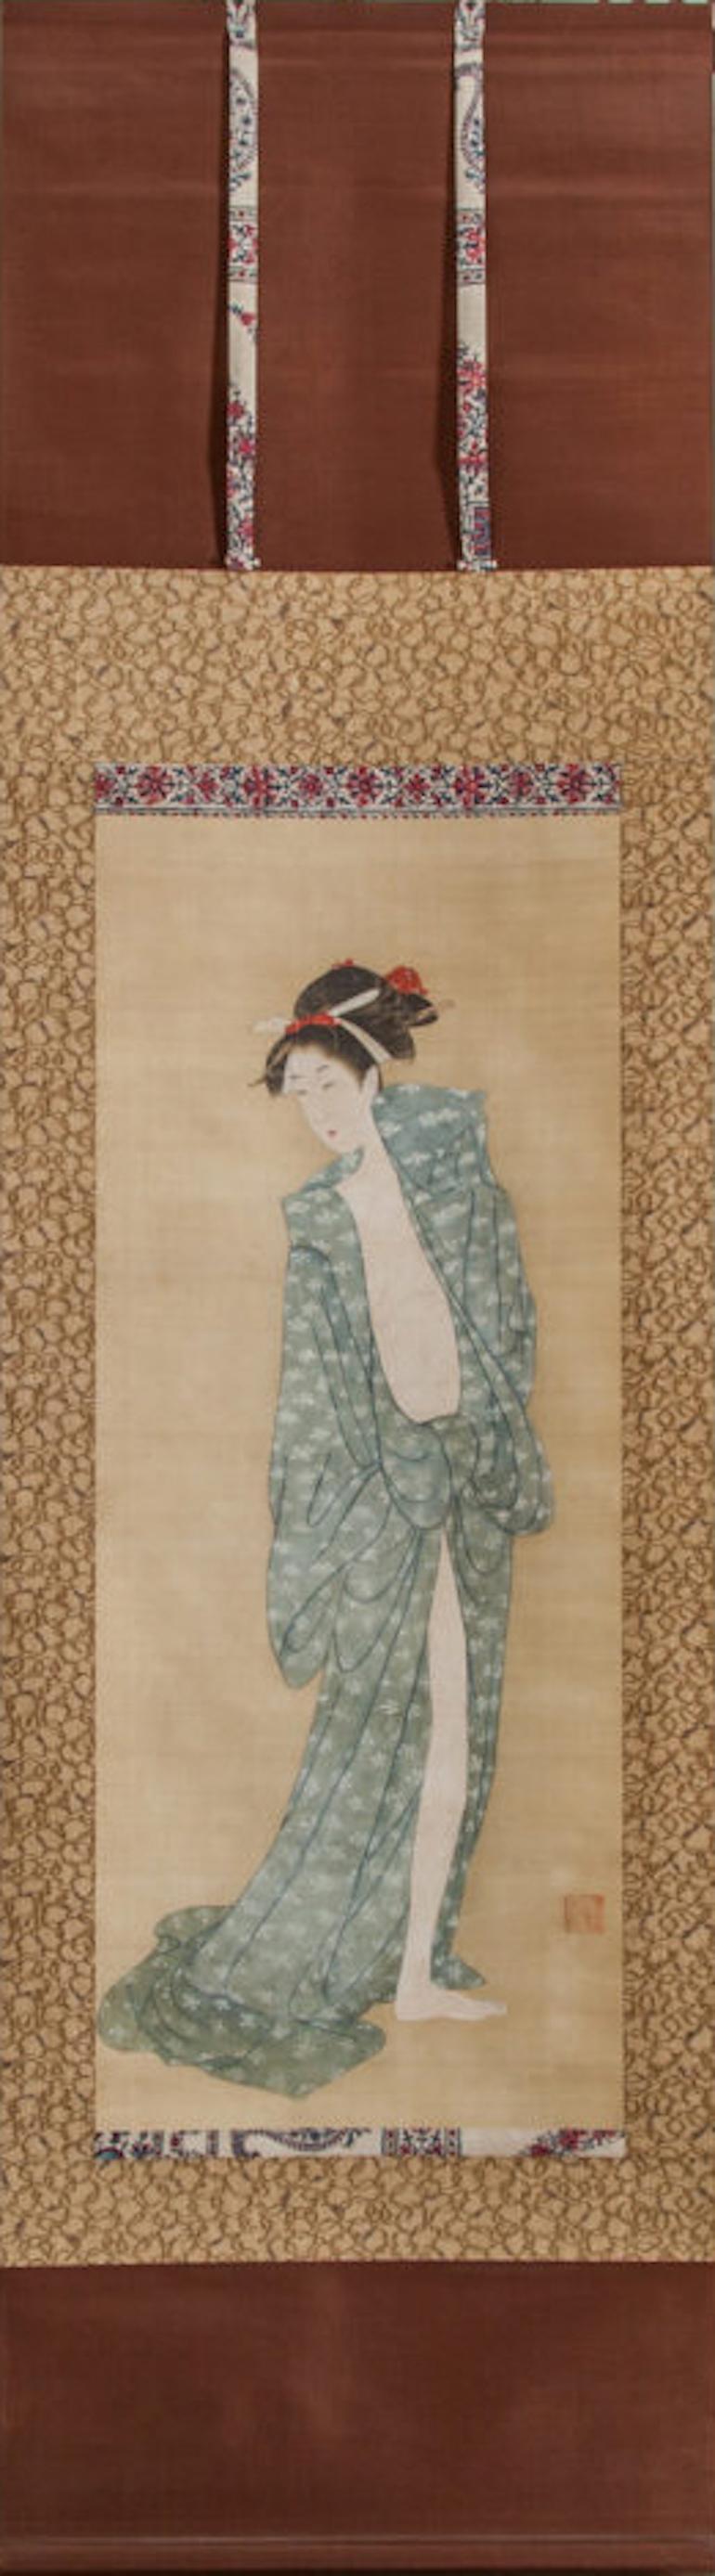 Early 19th century Japanese Scroll: Bijin after the bath in summer. Painted in pigments on silk. Signature reads: Yamauchi Sentsu.
Japan, painted circa 1800, remounted, circa 1900.
Measures: Painting 37